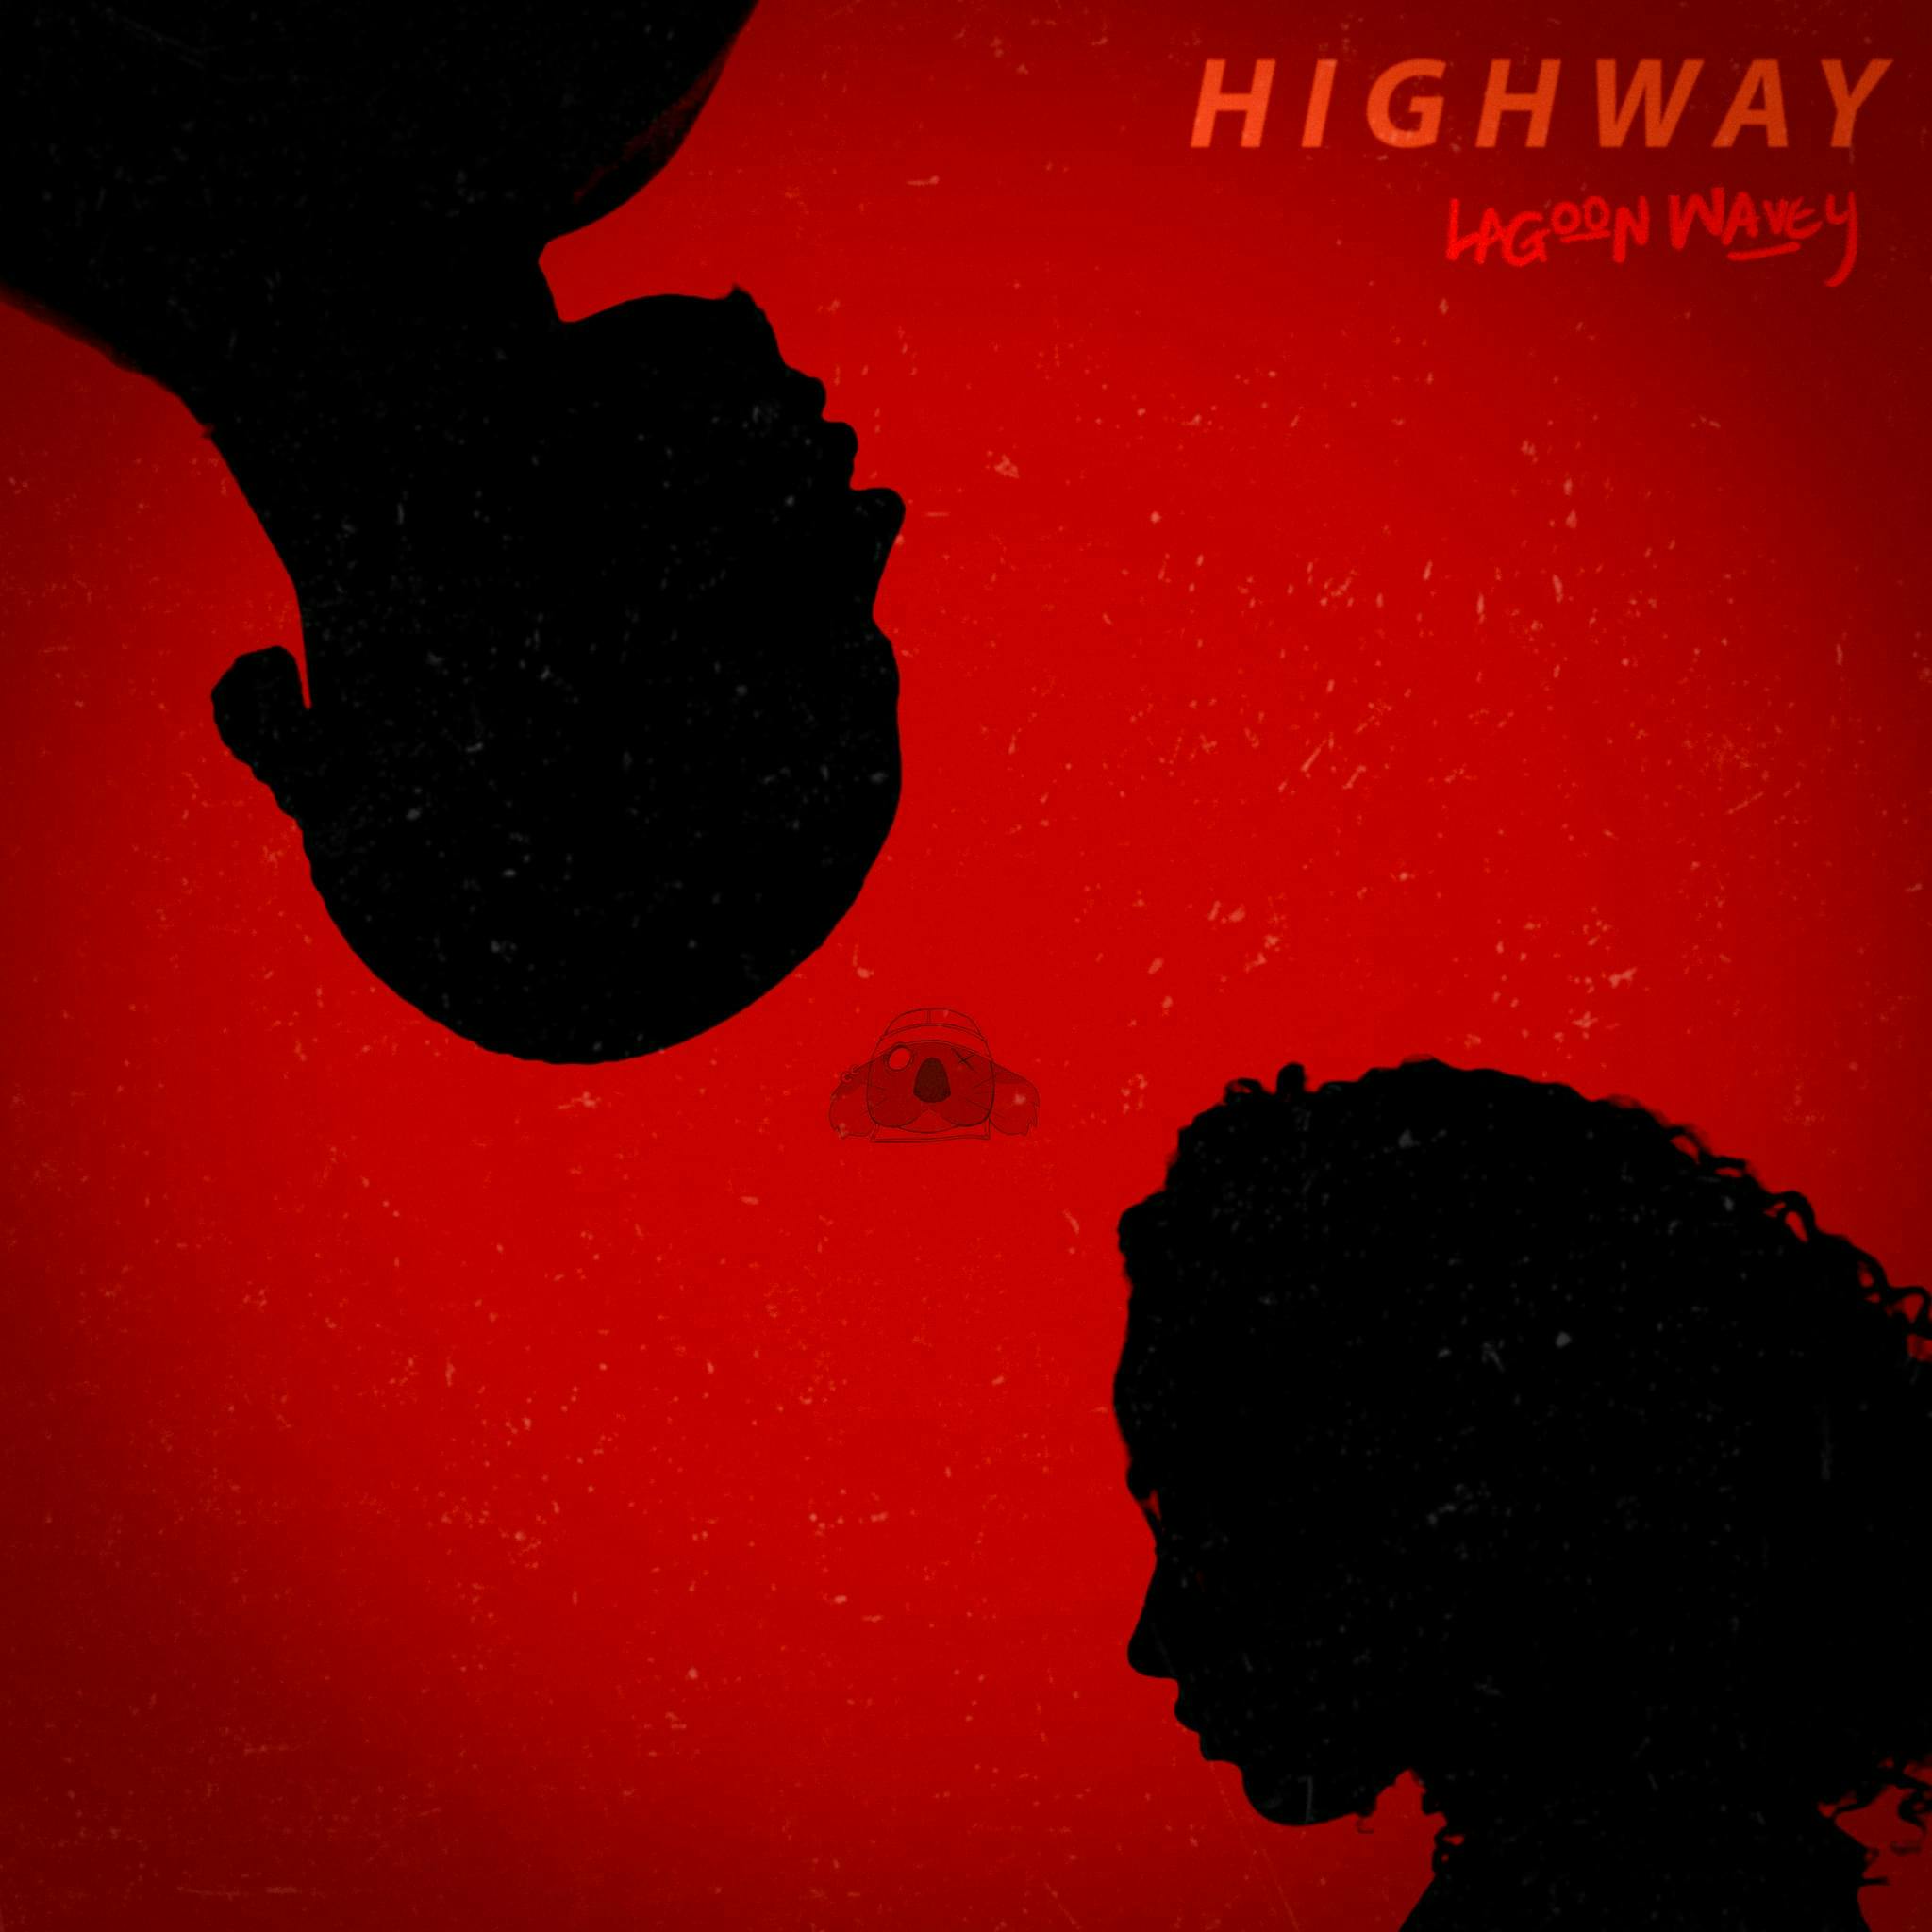 Cover art for Lagoon Wavey's song: Highway